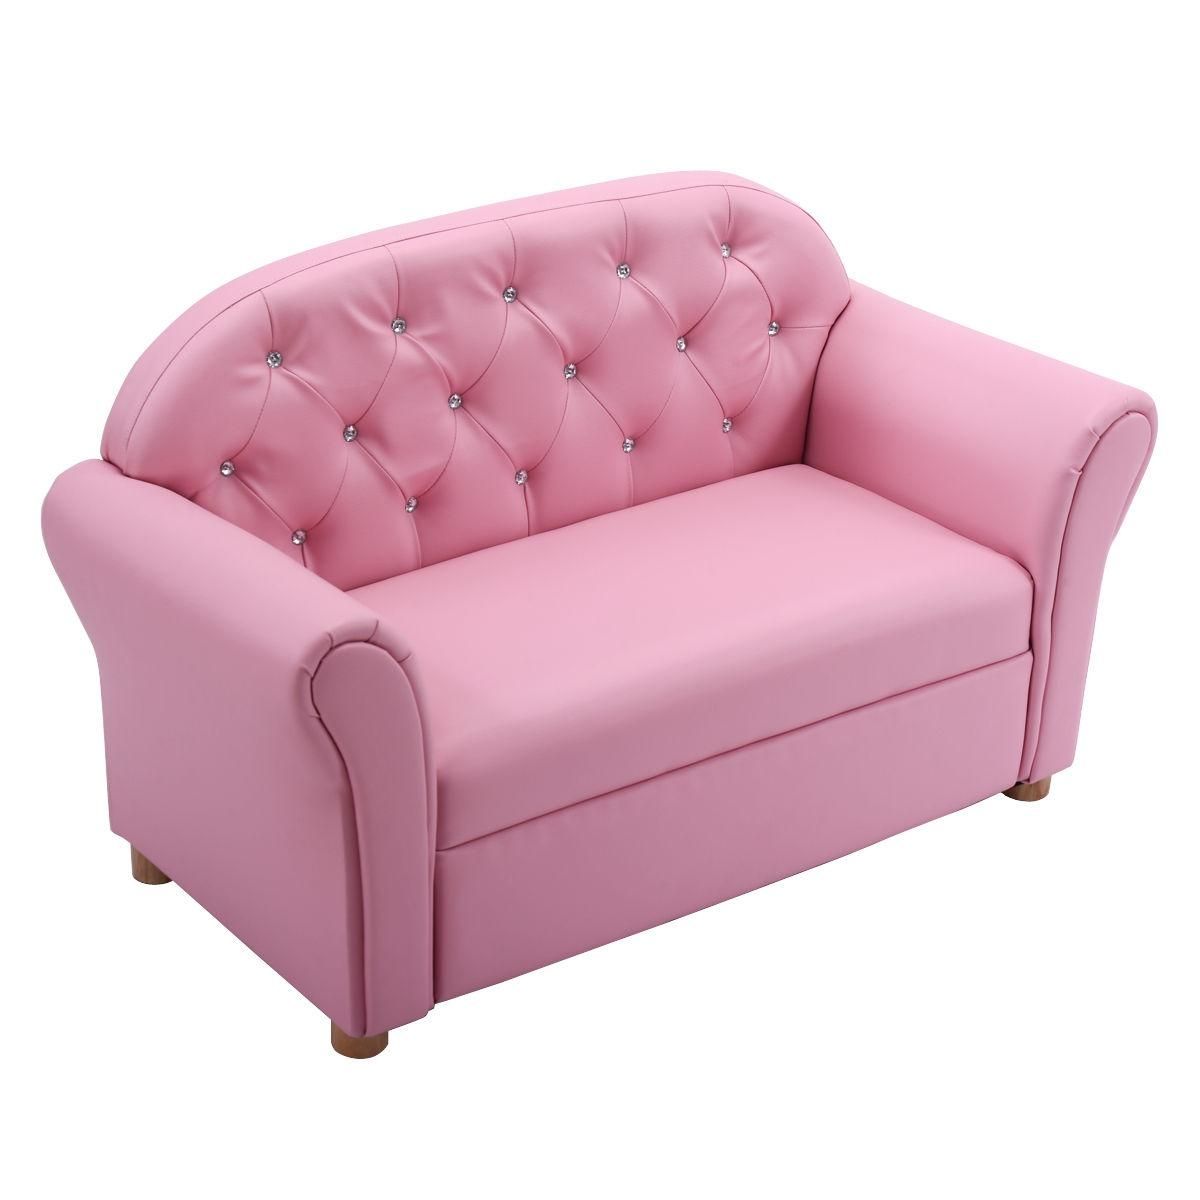 Costway Kids Sofa Princess Armrest Chair Lounge Couch Flip Open With Regard To Toddler Sofa Chairs (View 19 of 20)